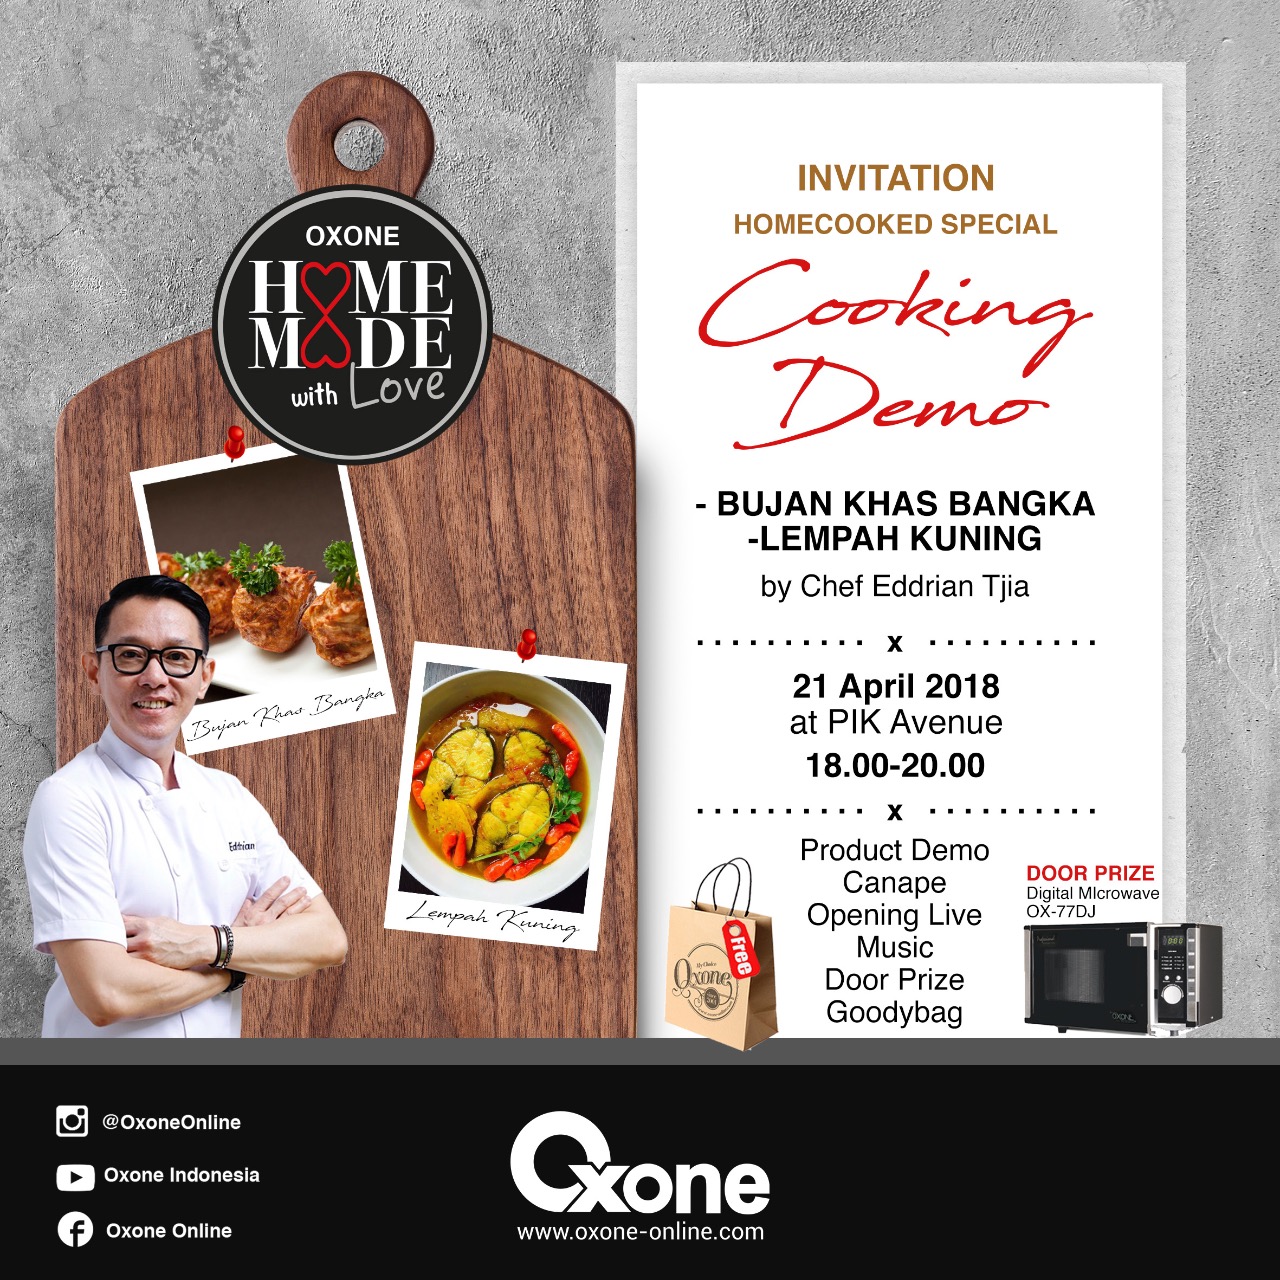 [EVENT REPORT] COOKING IN STYLE WITH OXONE INDONESIA - For 